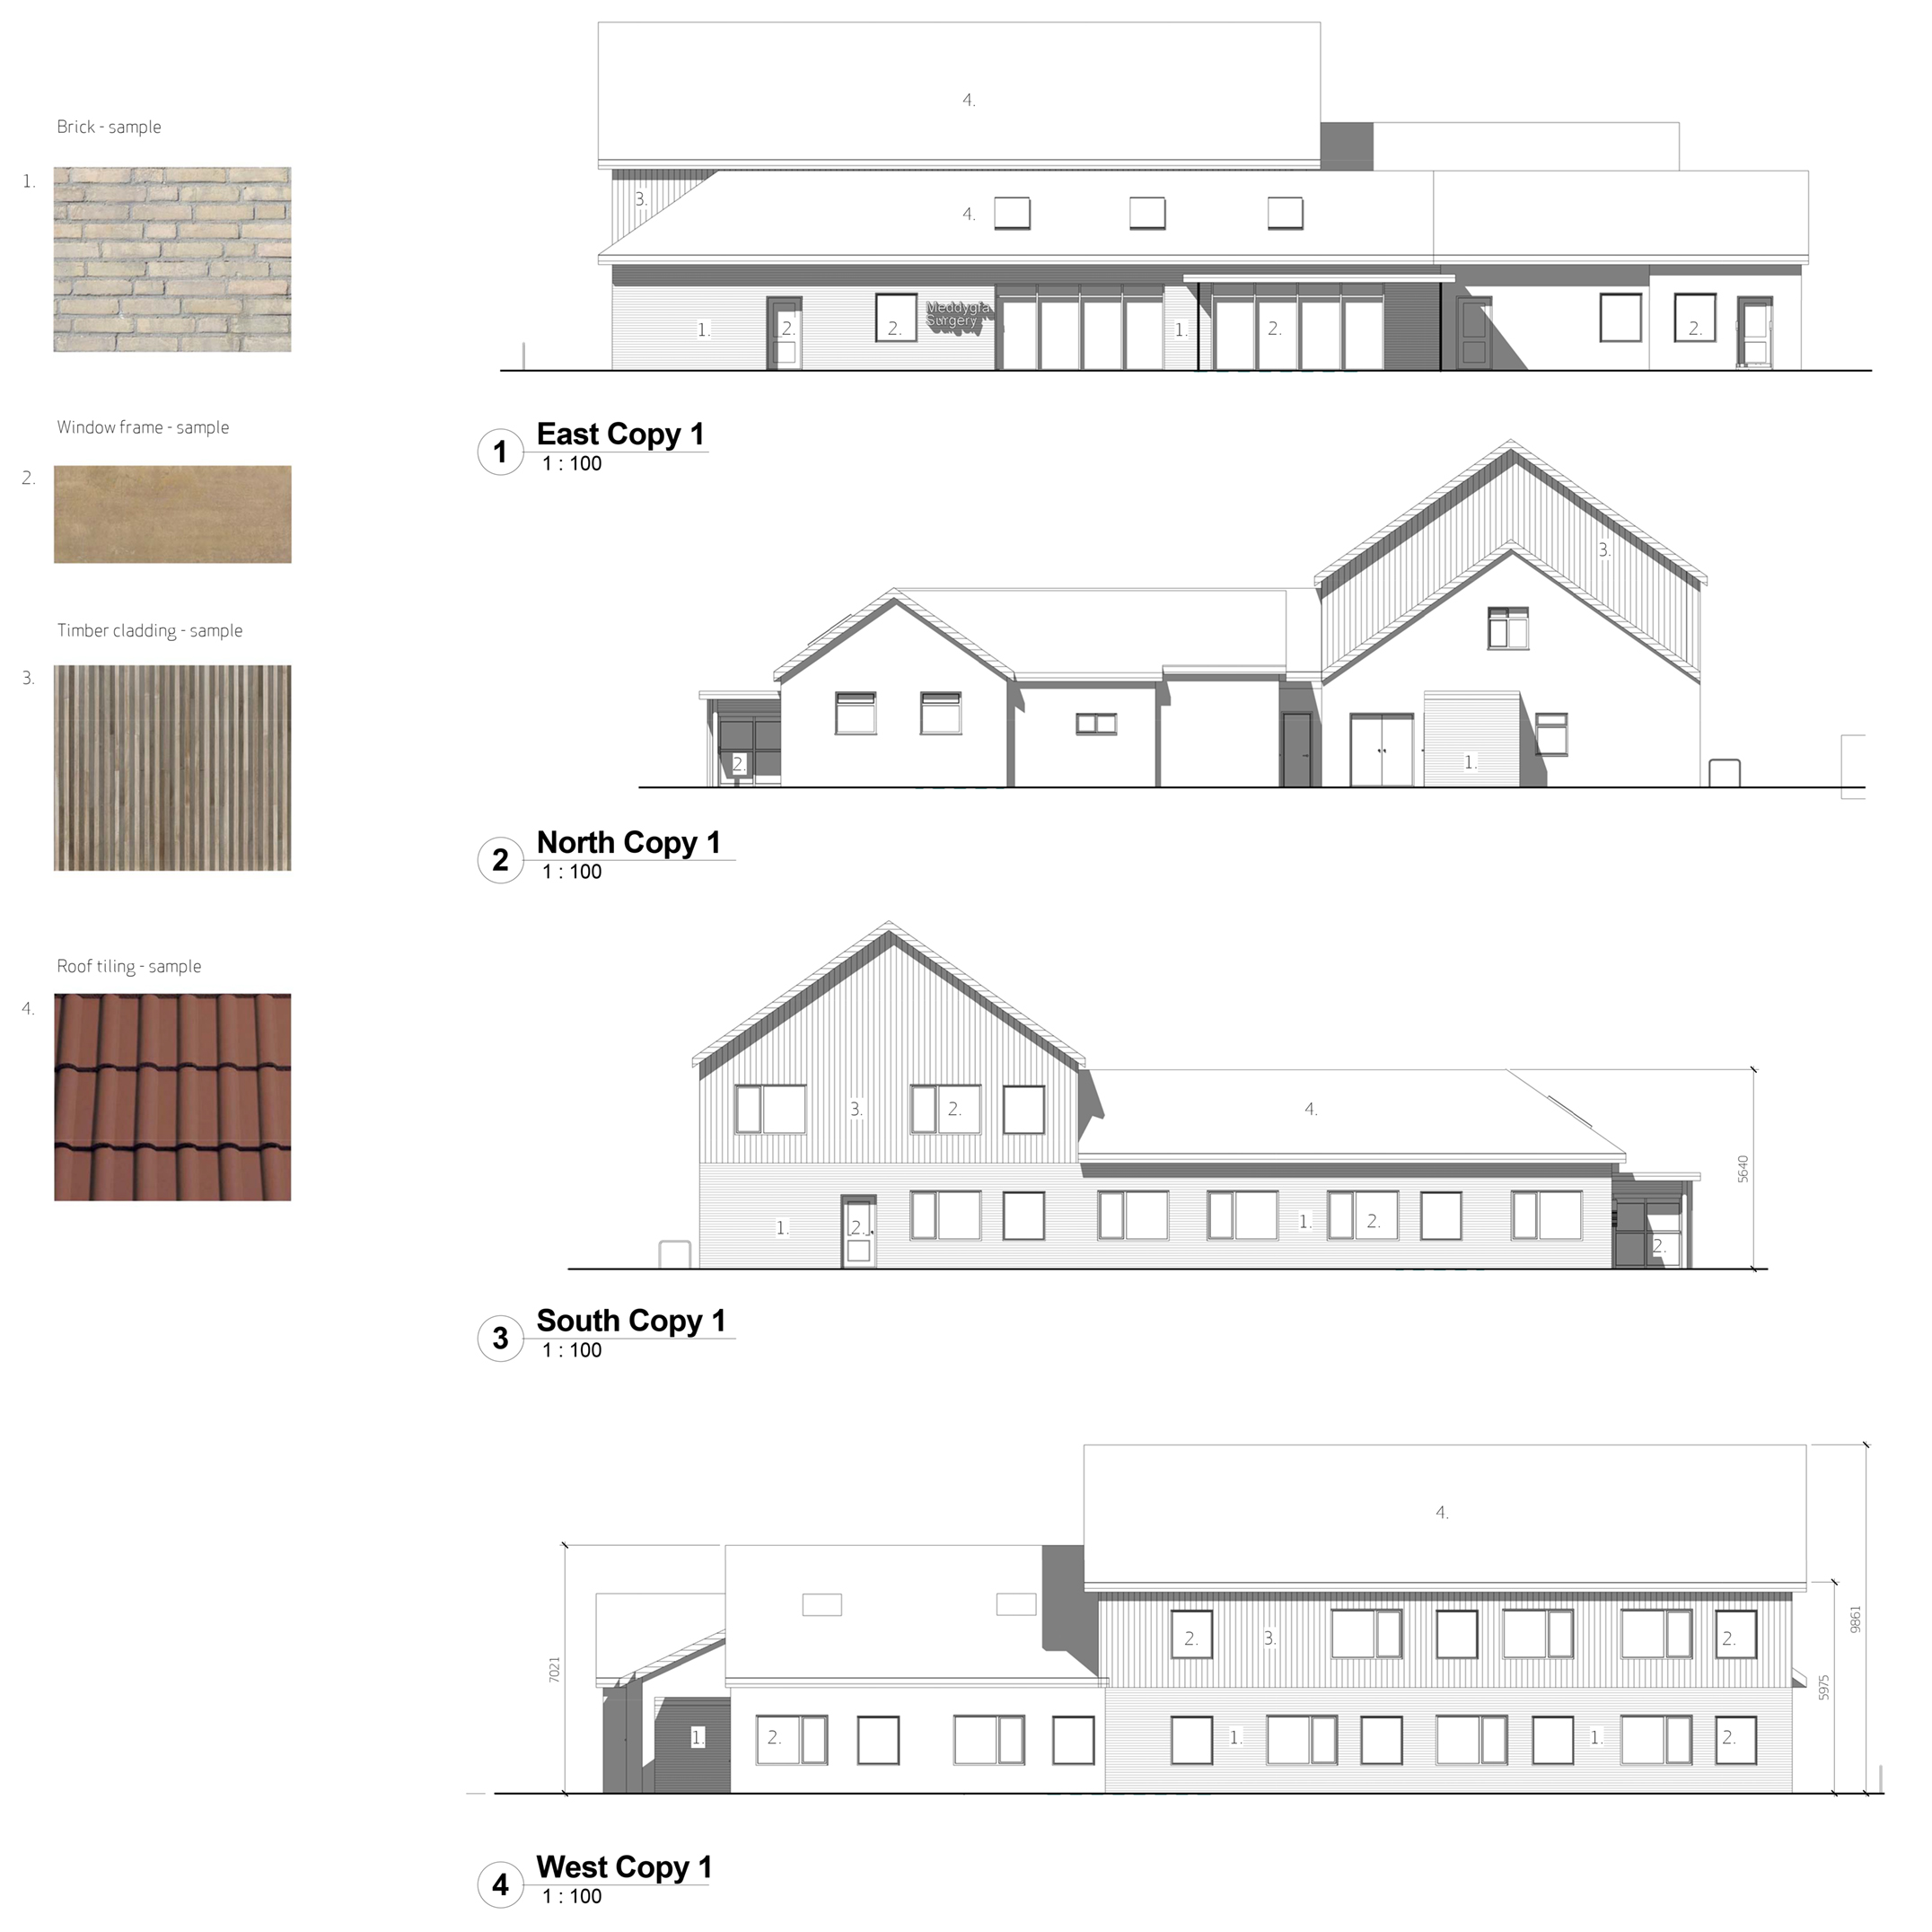 North Cornelly Surgery, Wales - Elevations